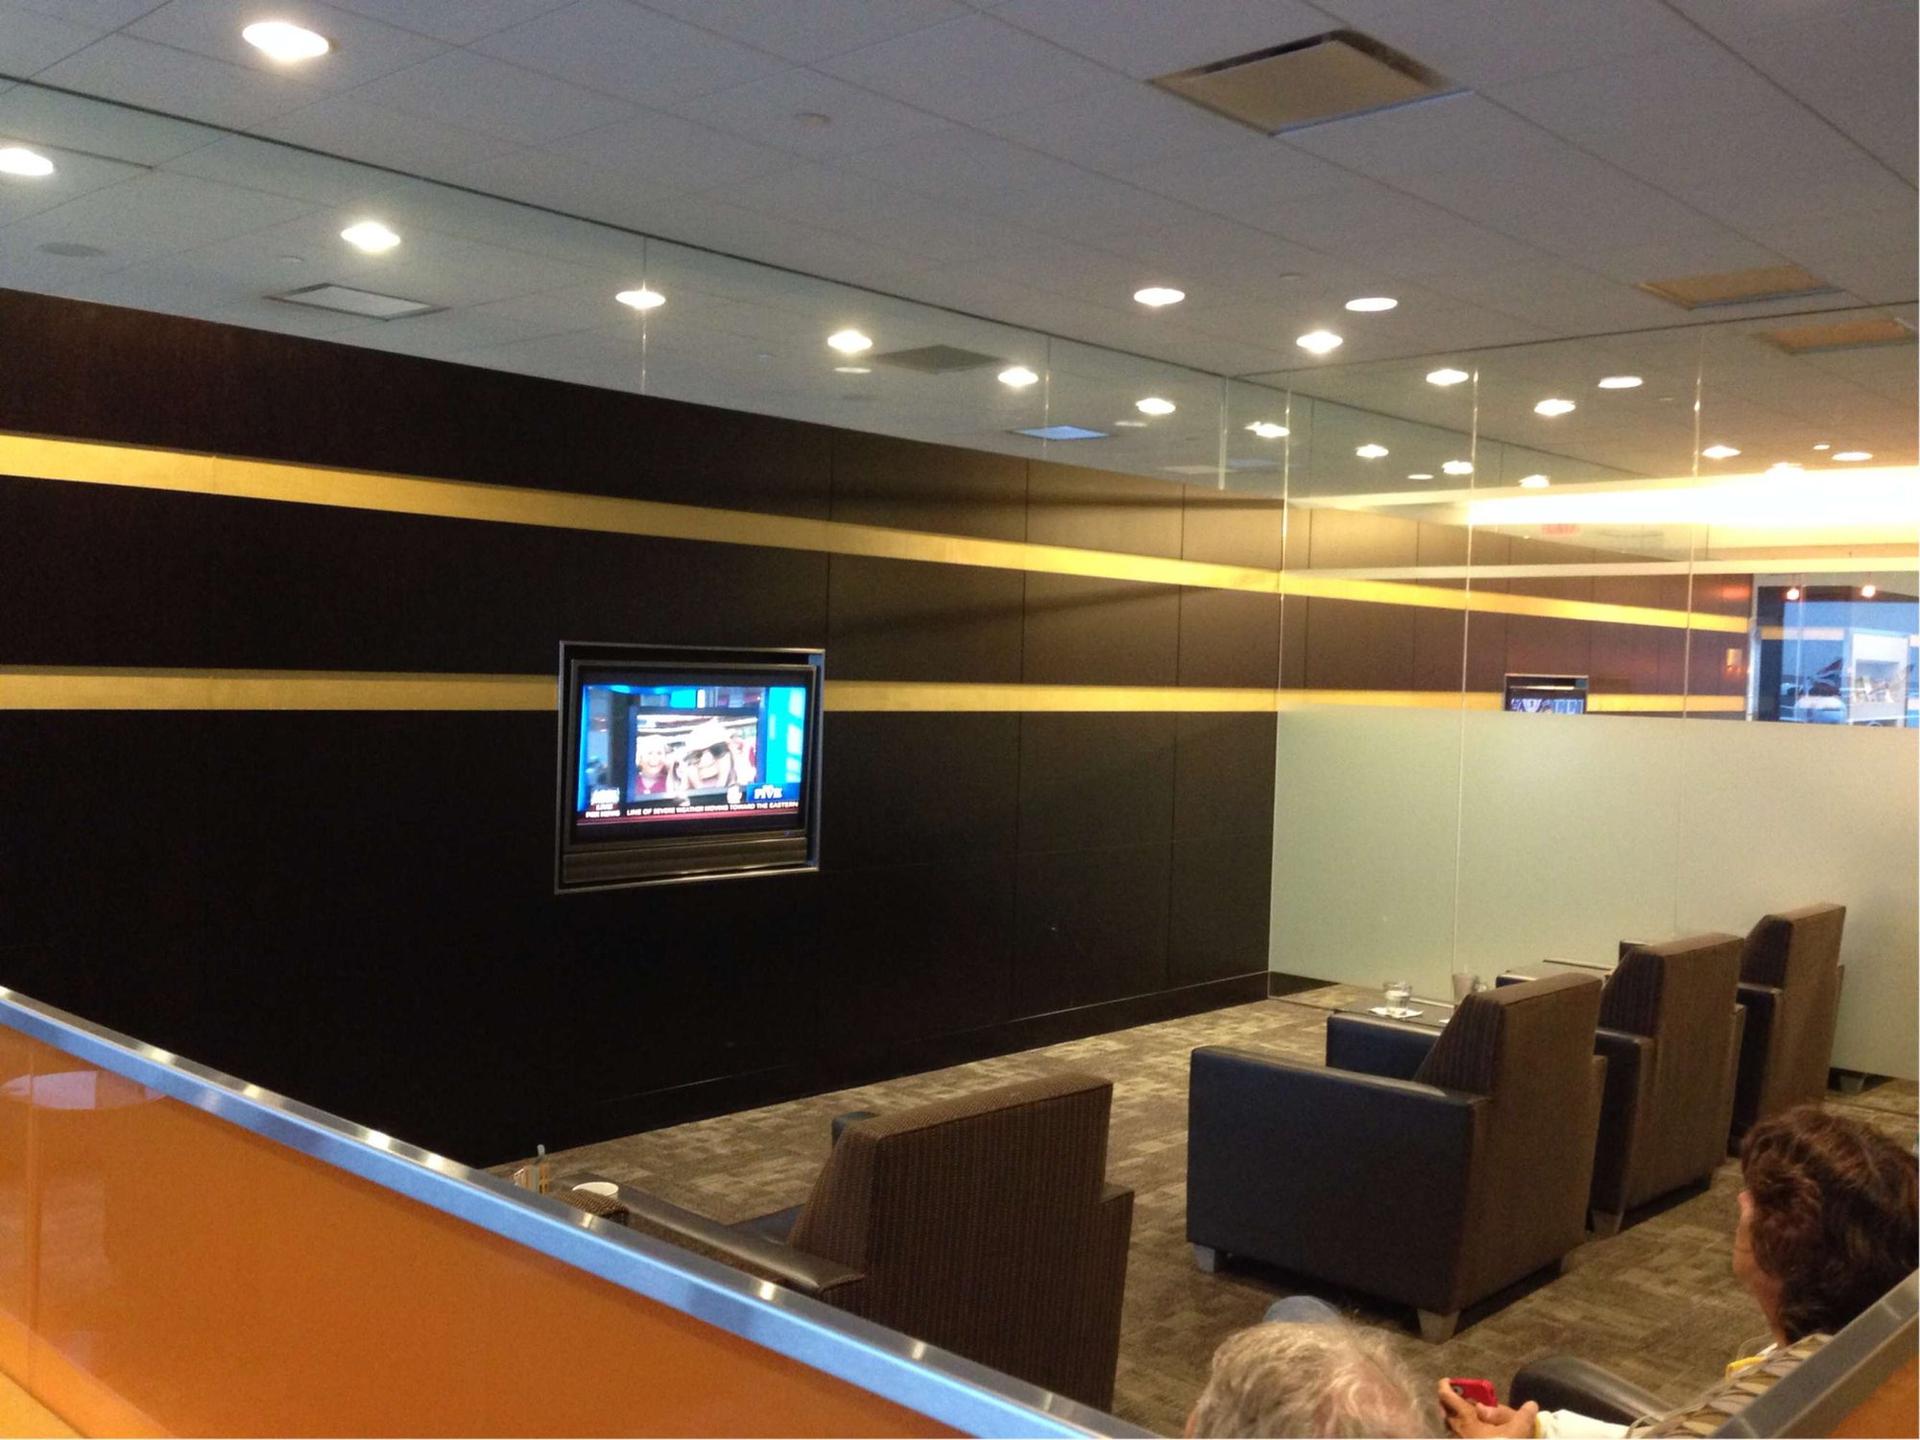 American Airlines Admirals Club image 7 of 25